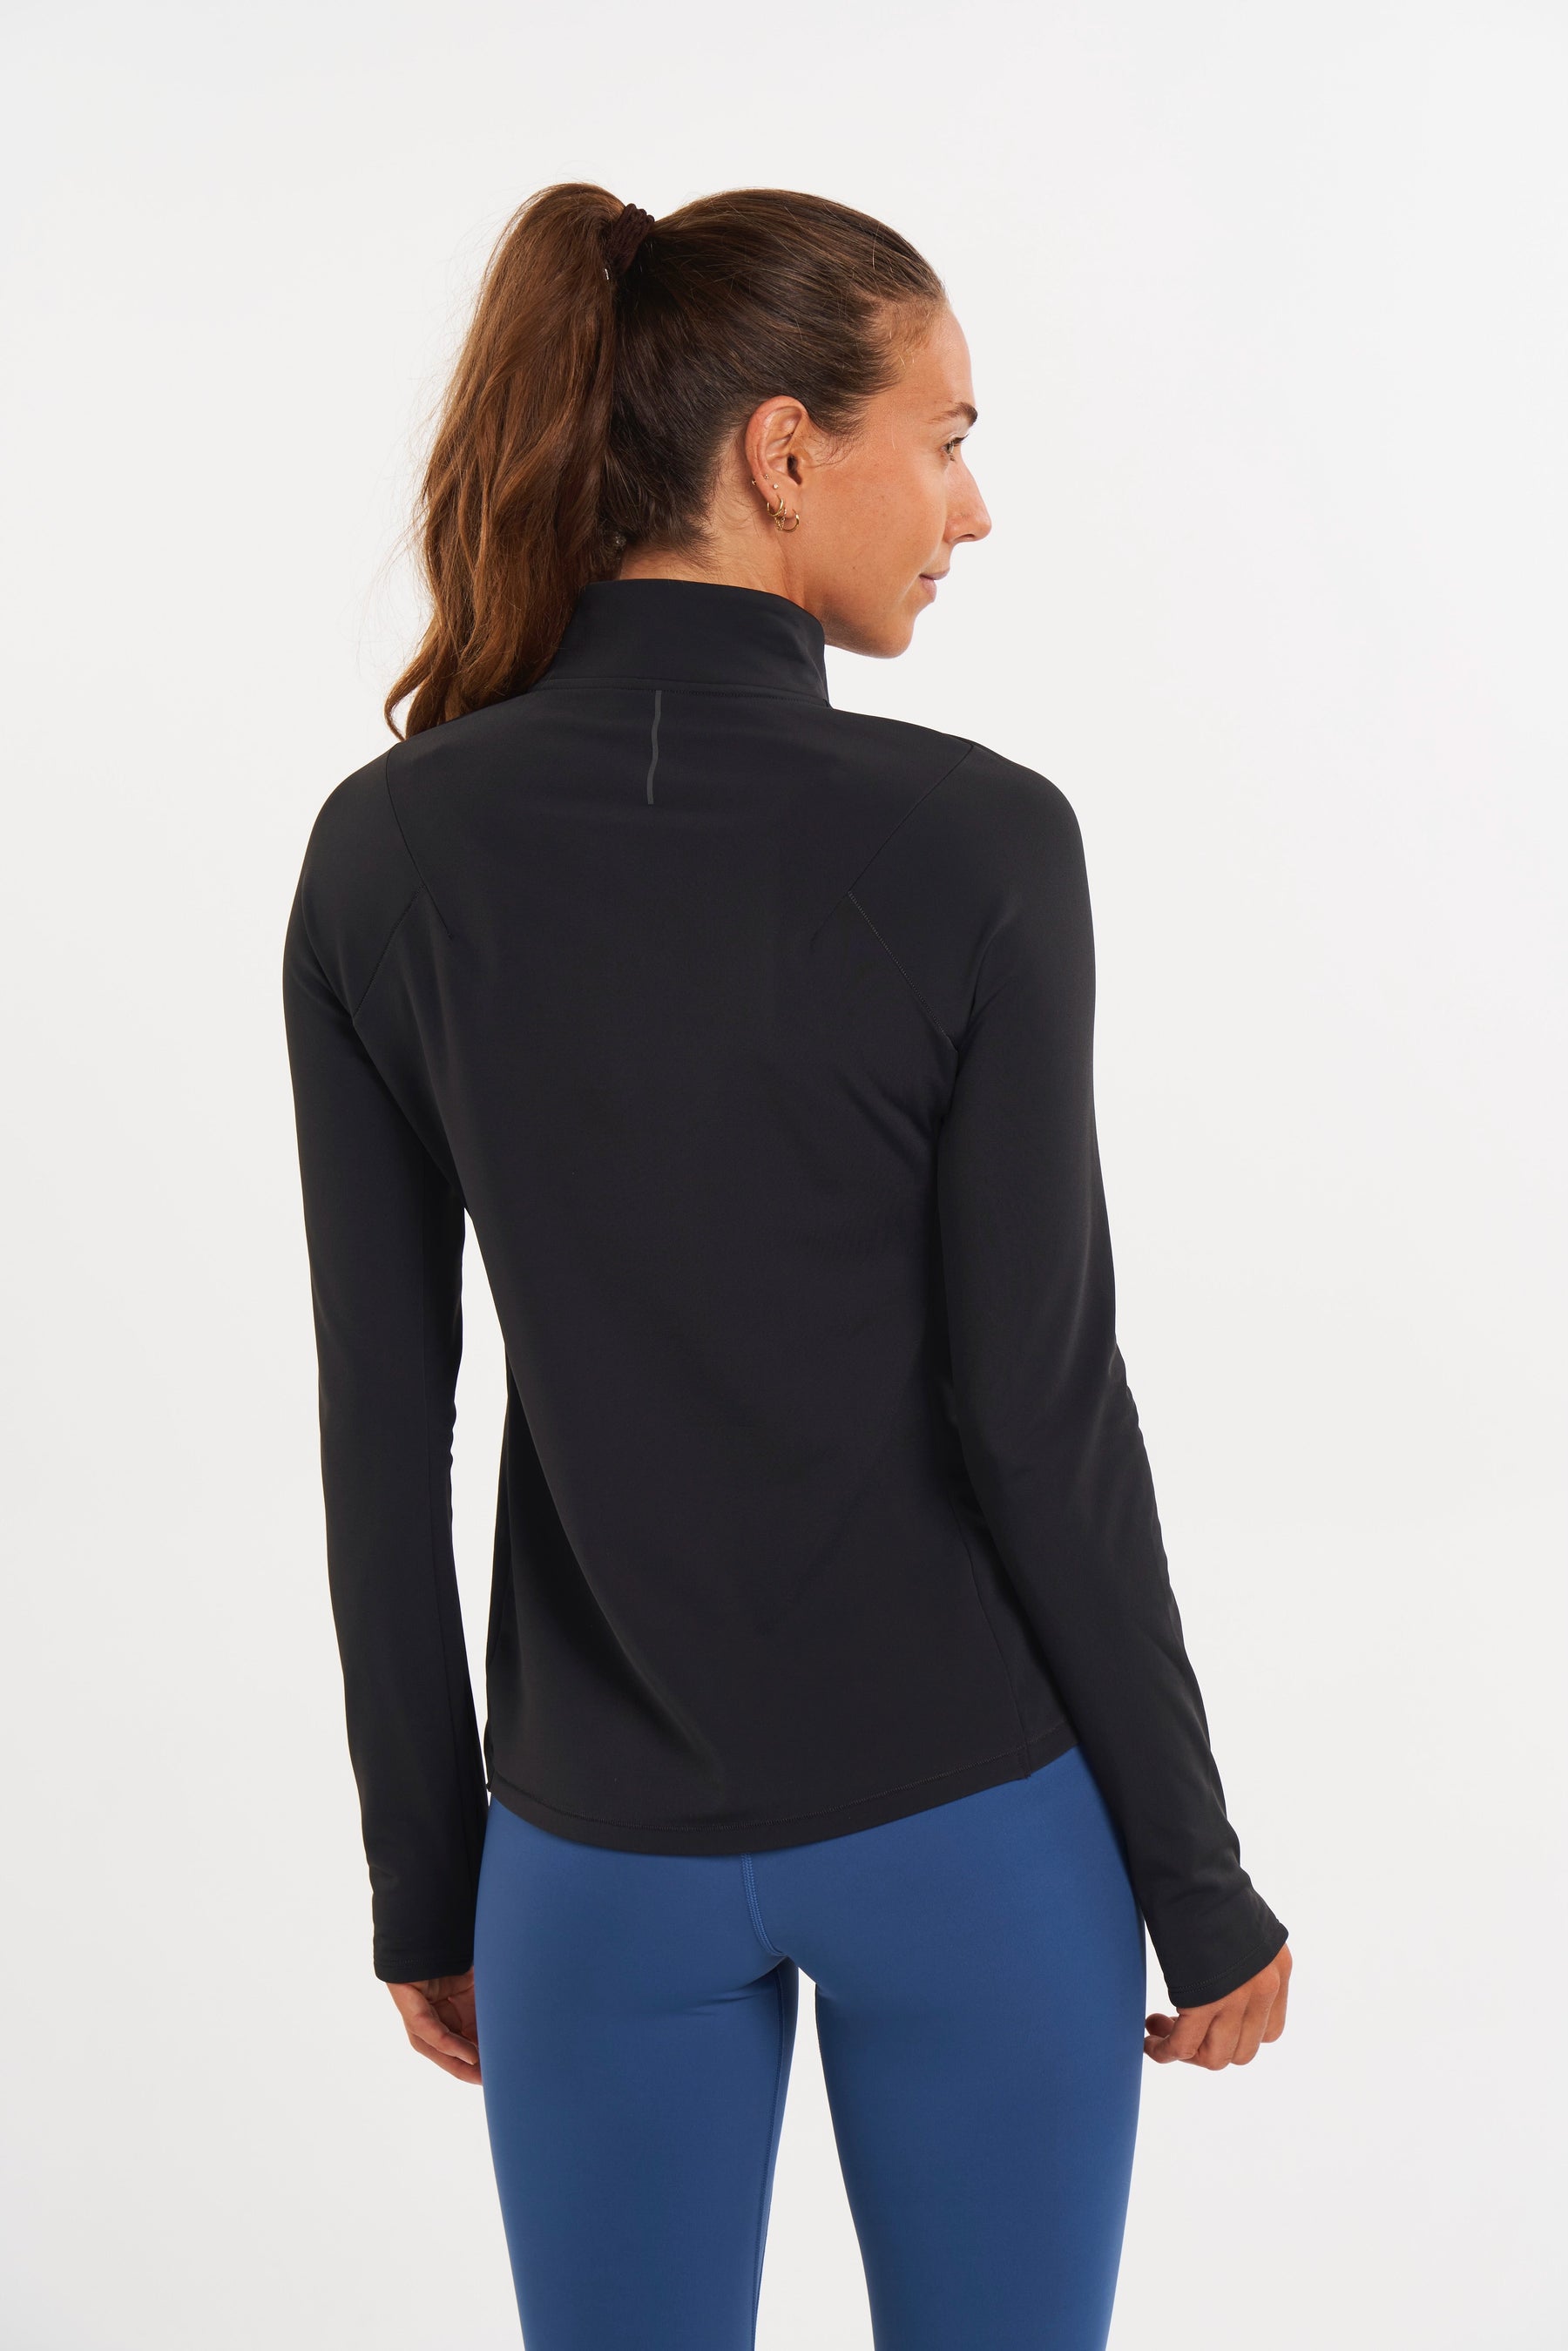 back view of athletic long sleeve top in lava rock (black)